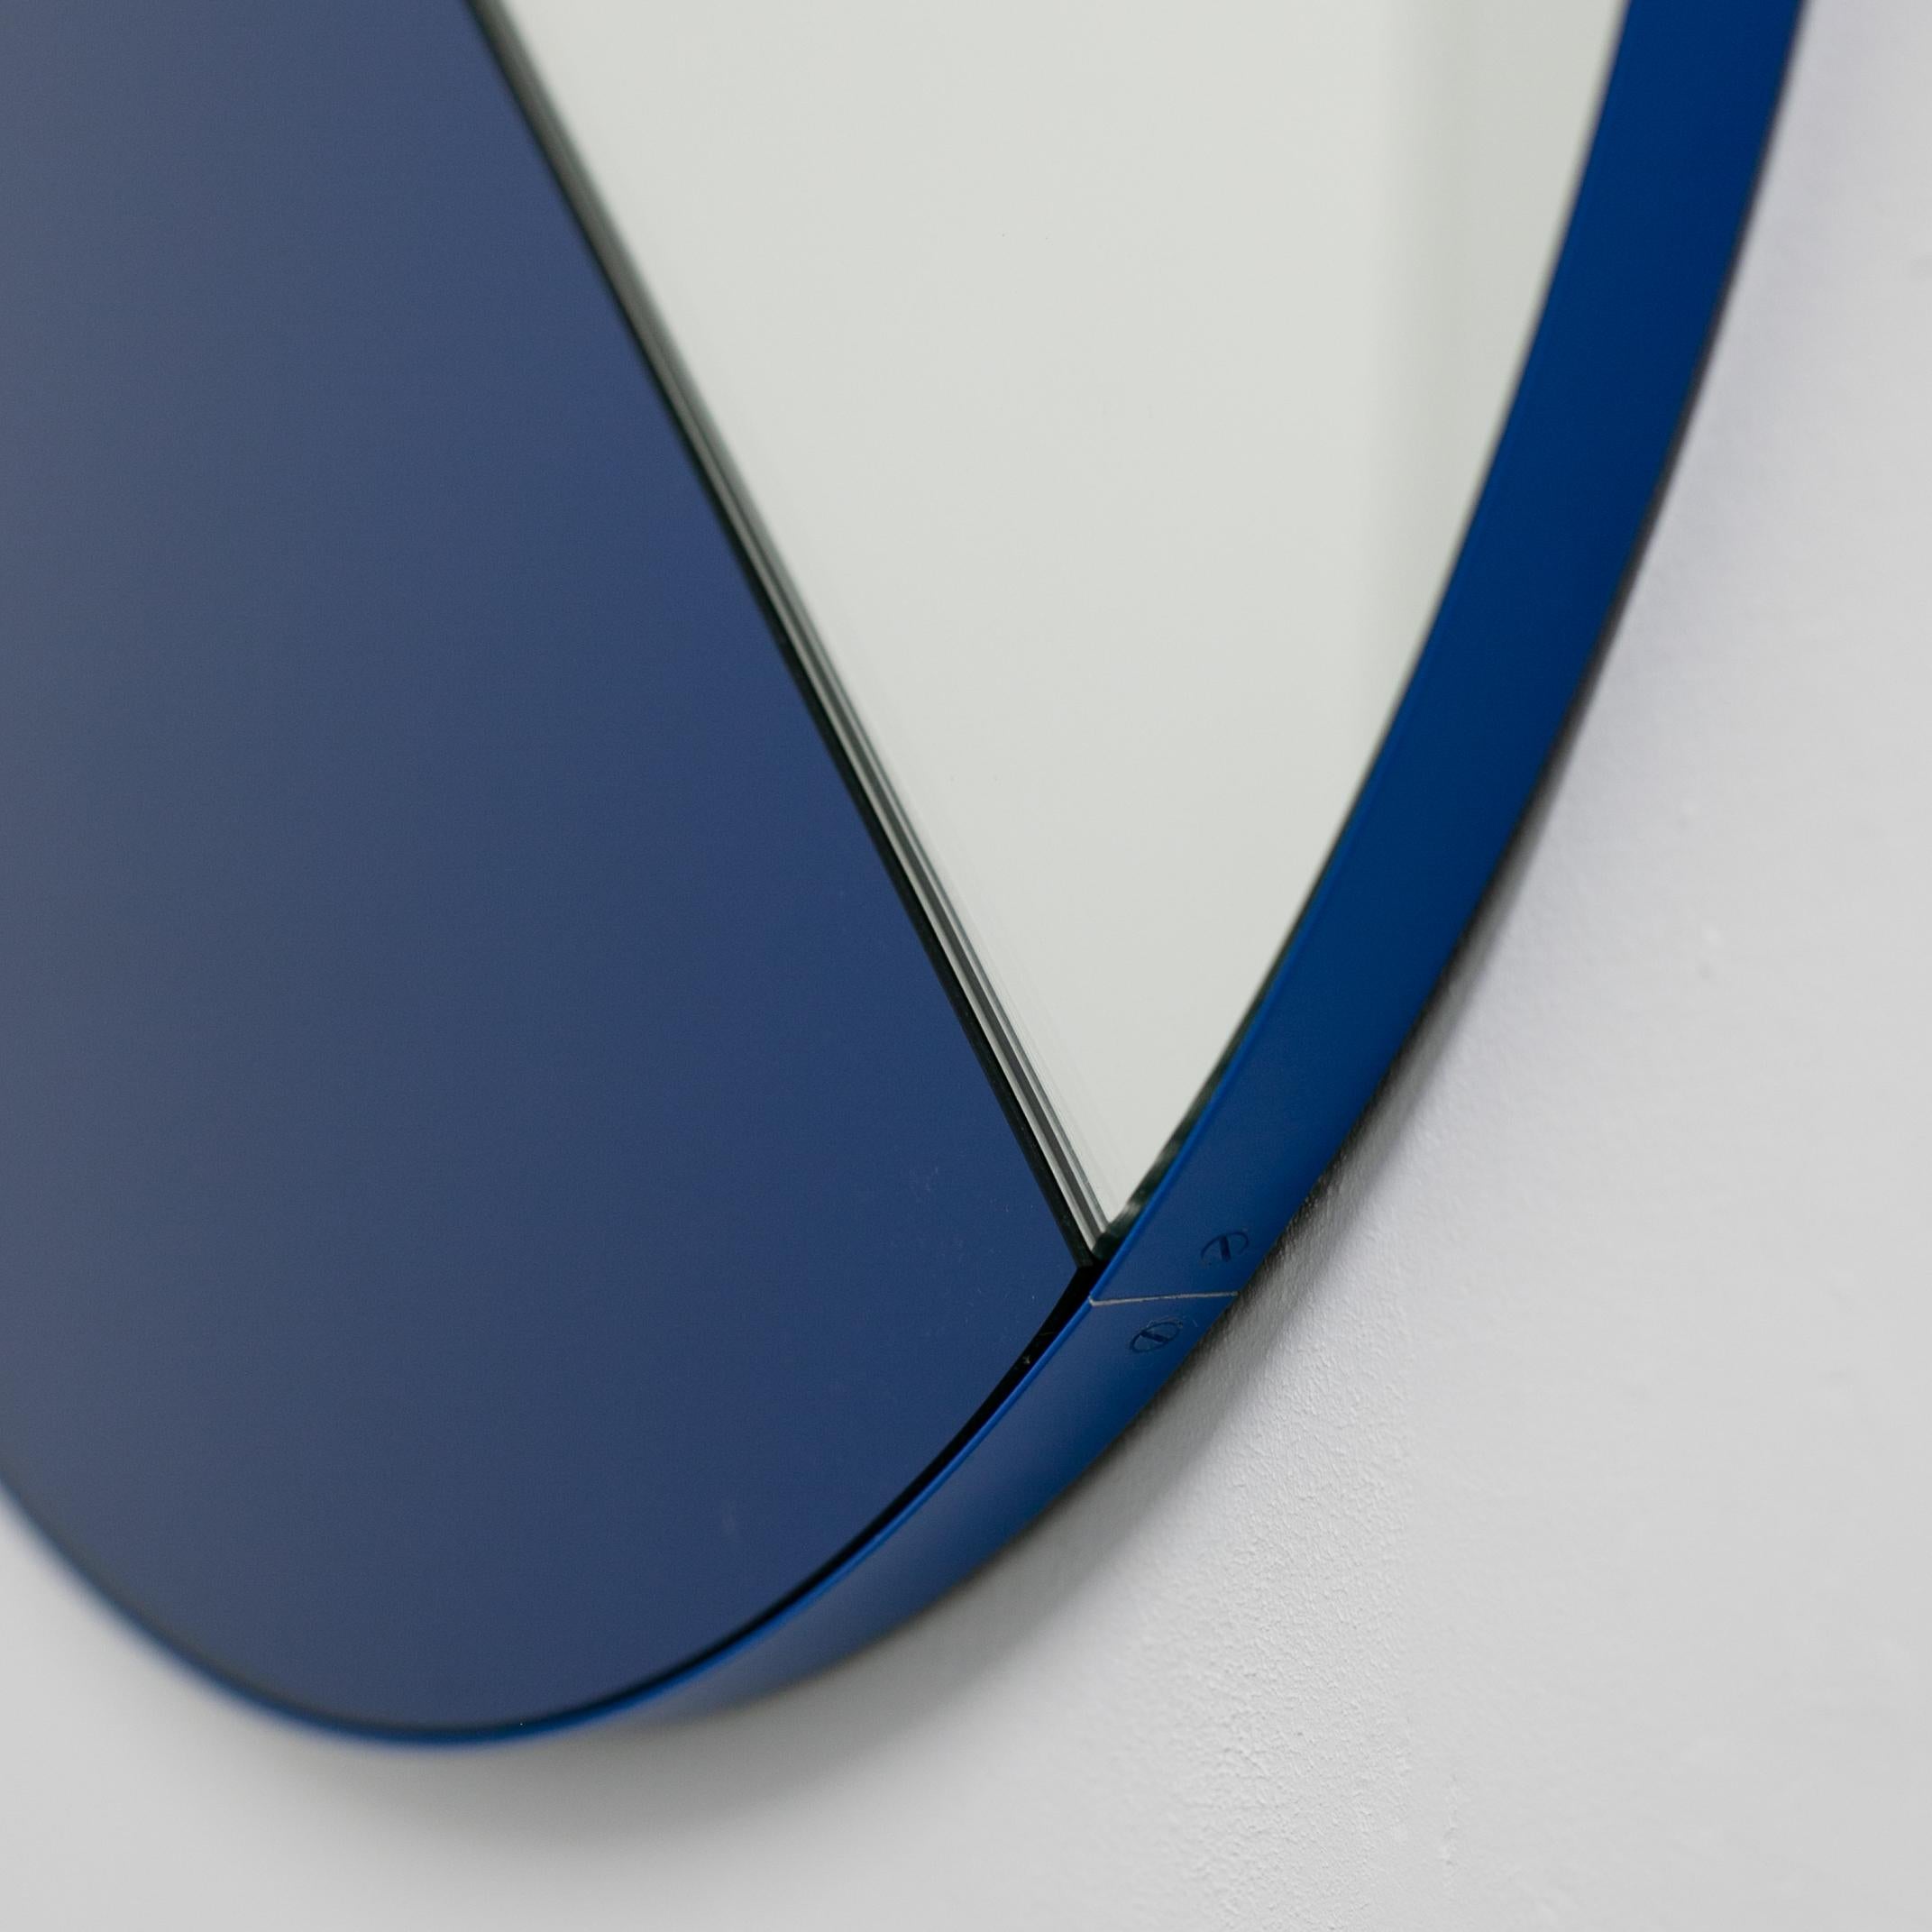 Orbis Dualis Mixed Blue Tinted Contemporary Round Mirror with Blue Frame, Small For Sale 4